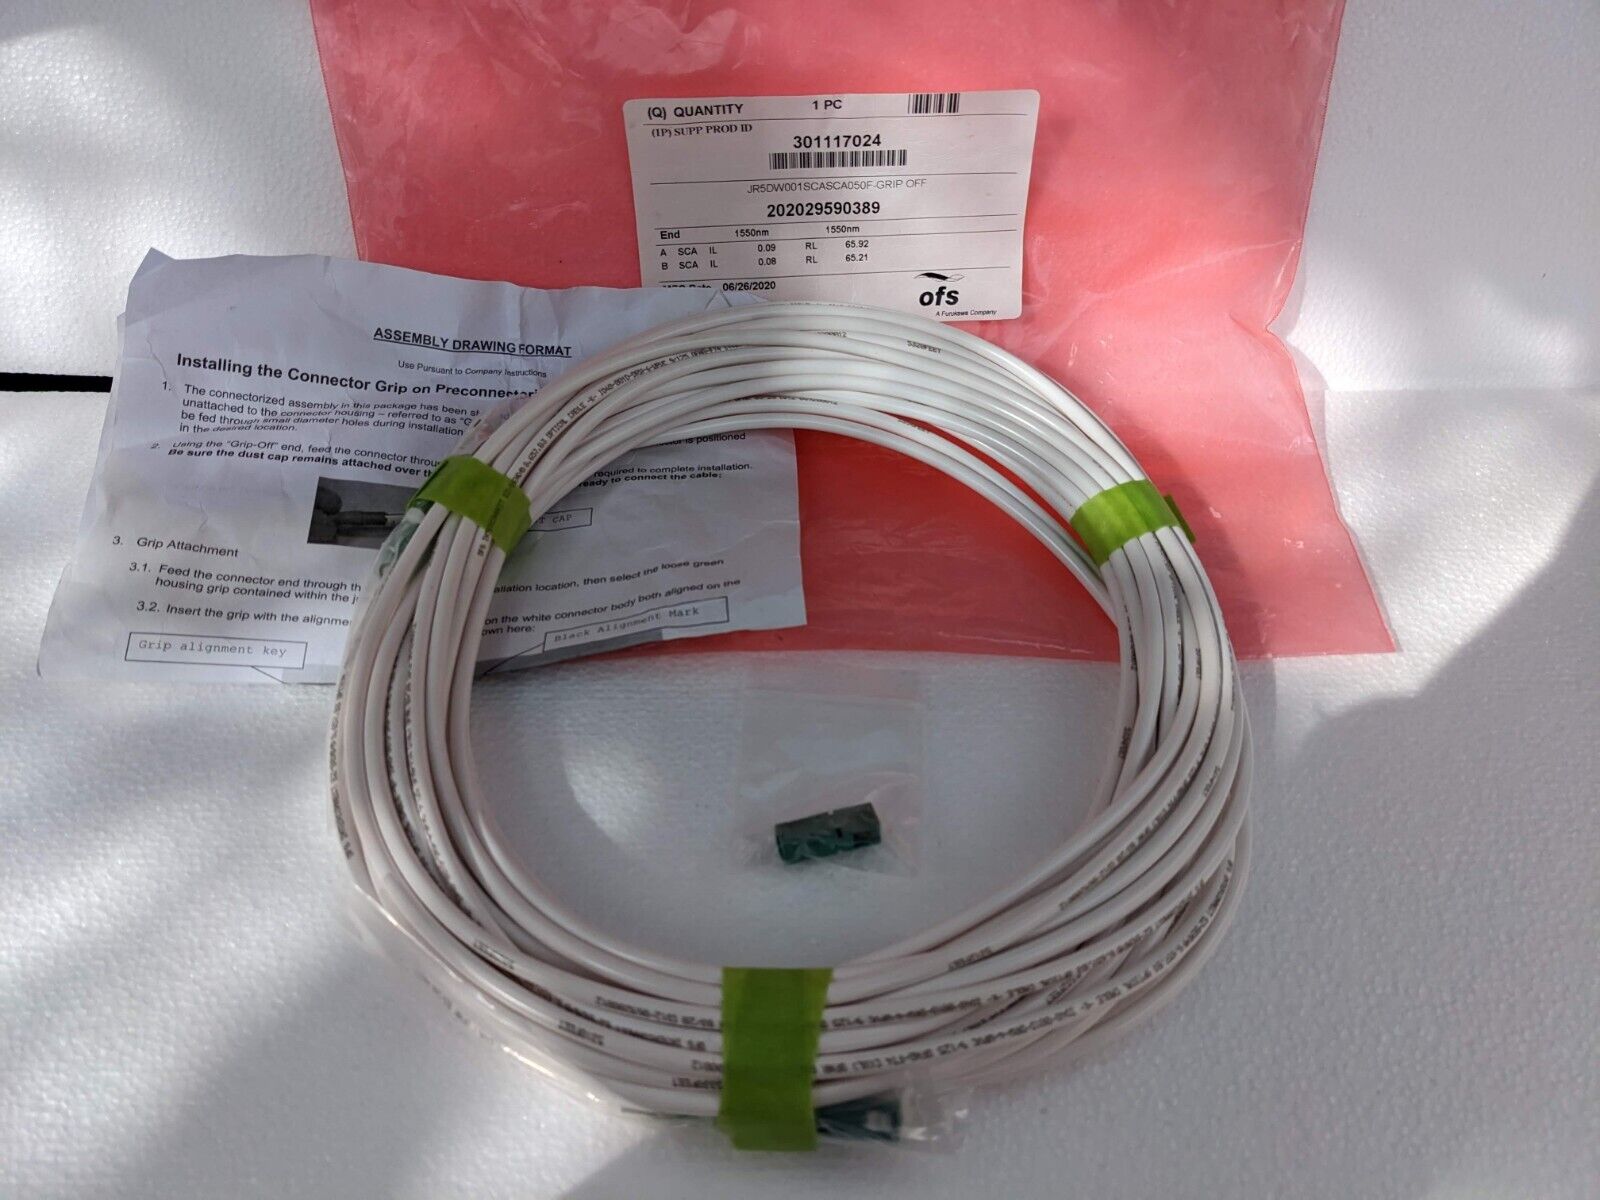 50 Ft OFS Indoor Preconnectorized Indoor Fiber Optic Cable JR5DW001SCASCA050F